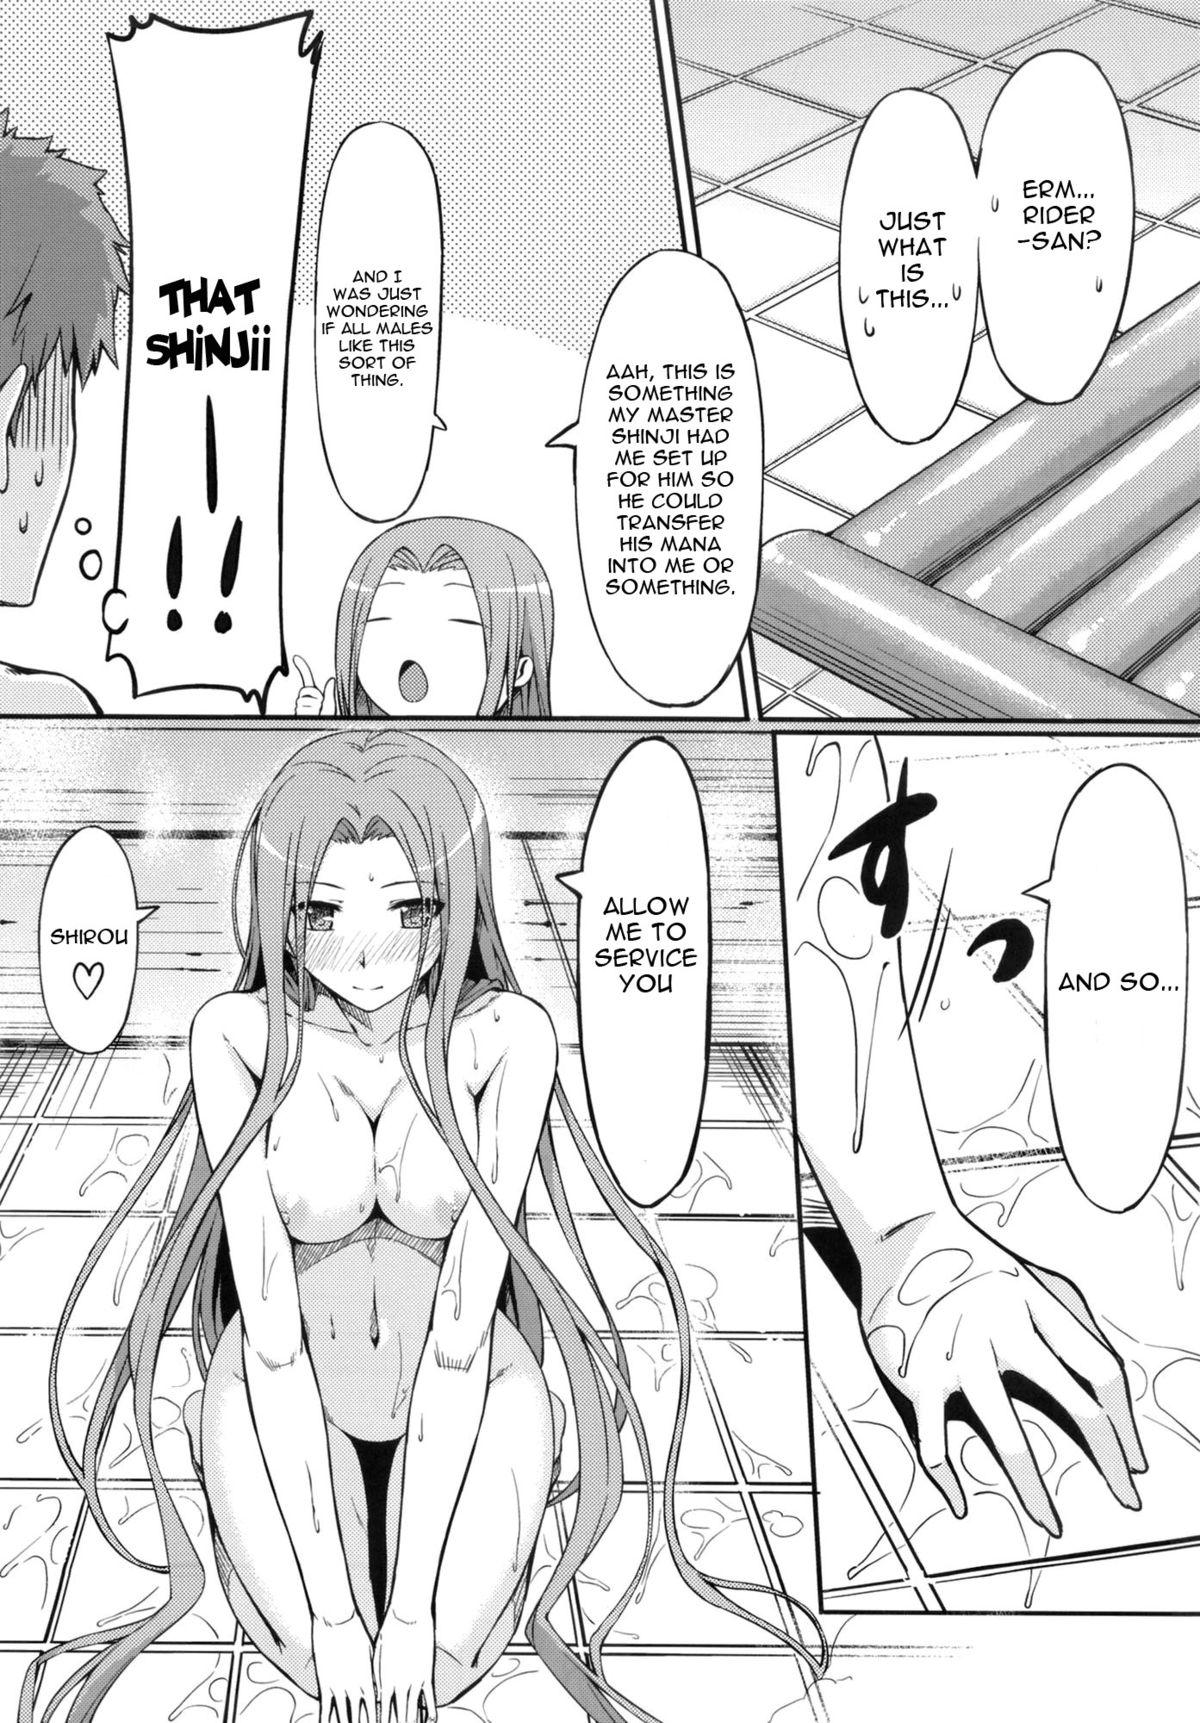 Submission Rider san to Ofuro. | Bathing with Rider-san. - Fate stay night Fate hollow ataraxia Asian - Page 6